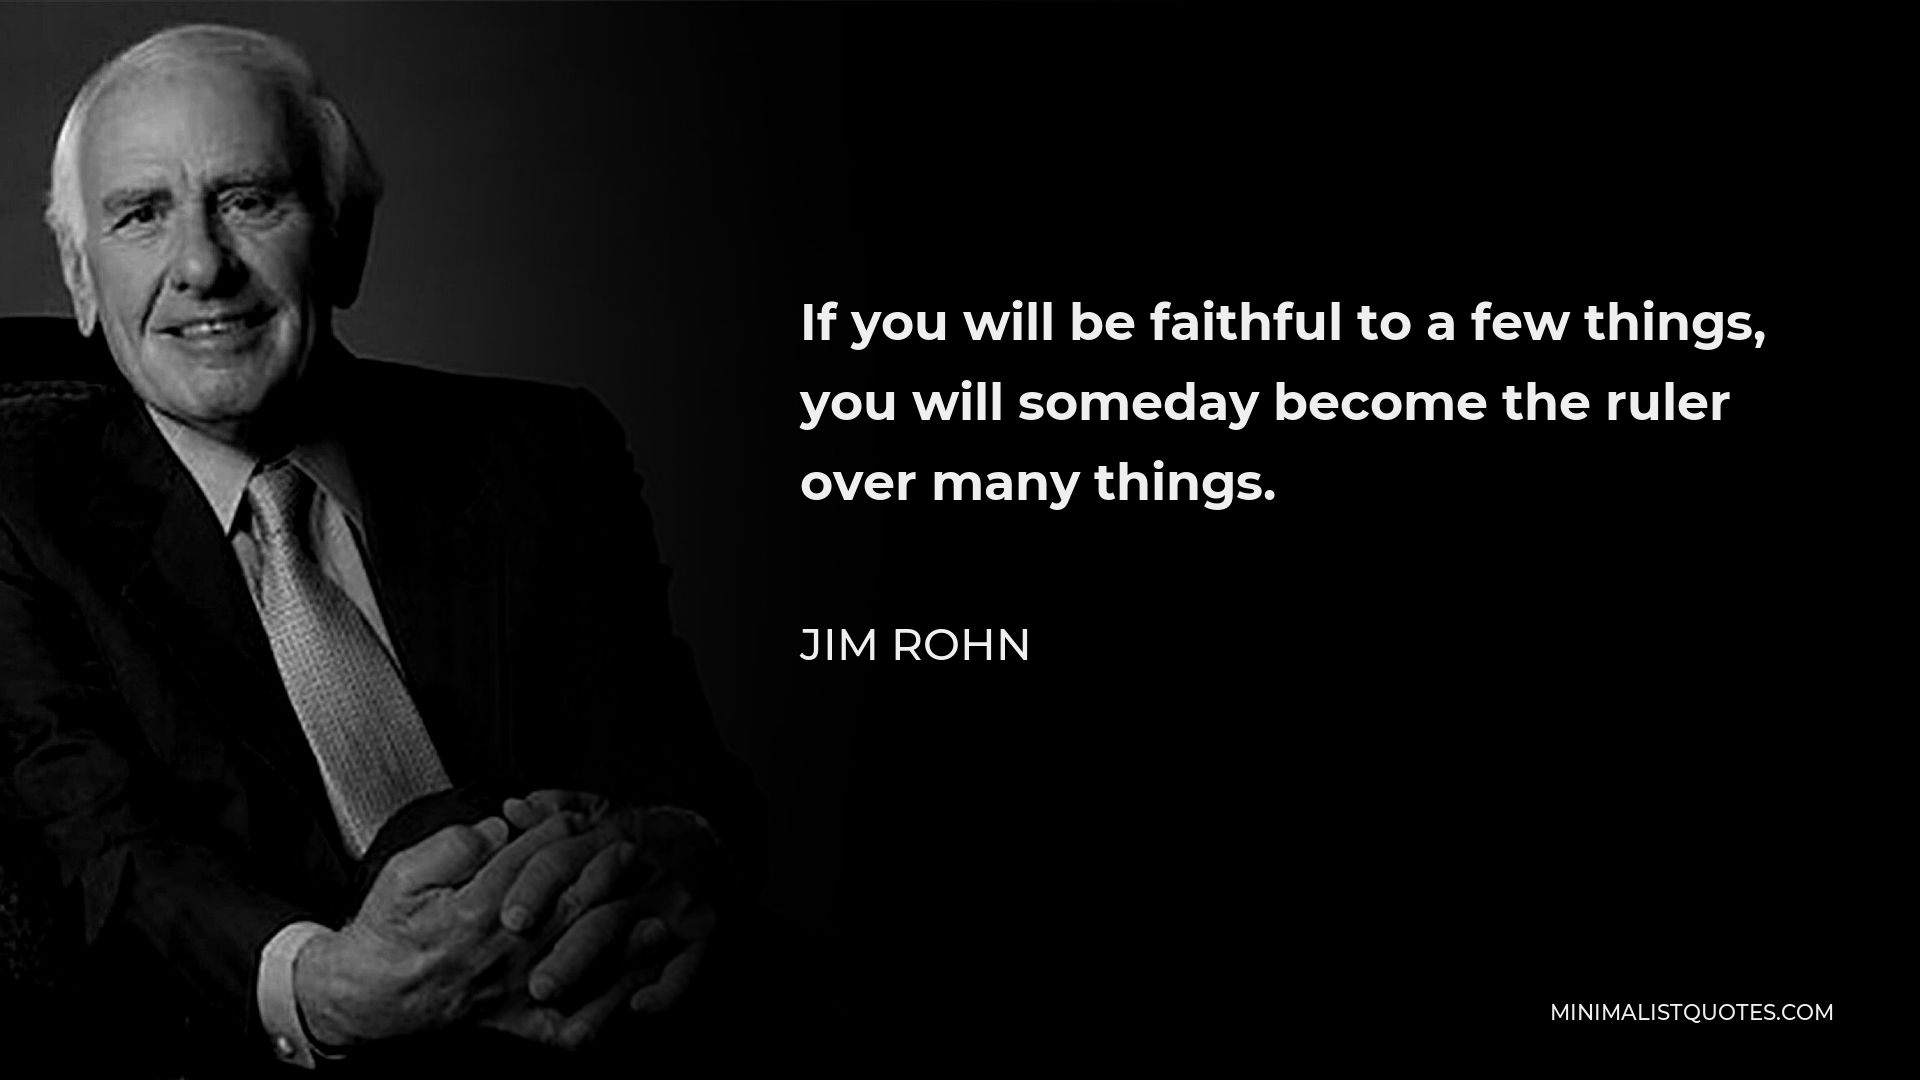 Jim Rohn Quote - If you will be faithful to a few things, you will someday become the ruler over many things.